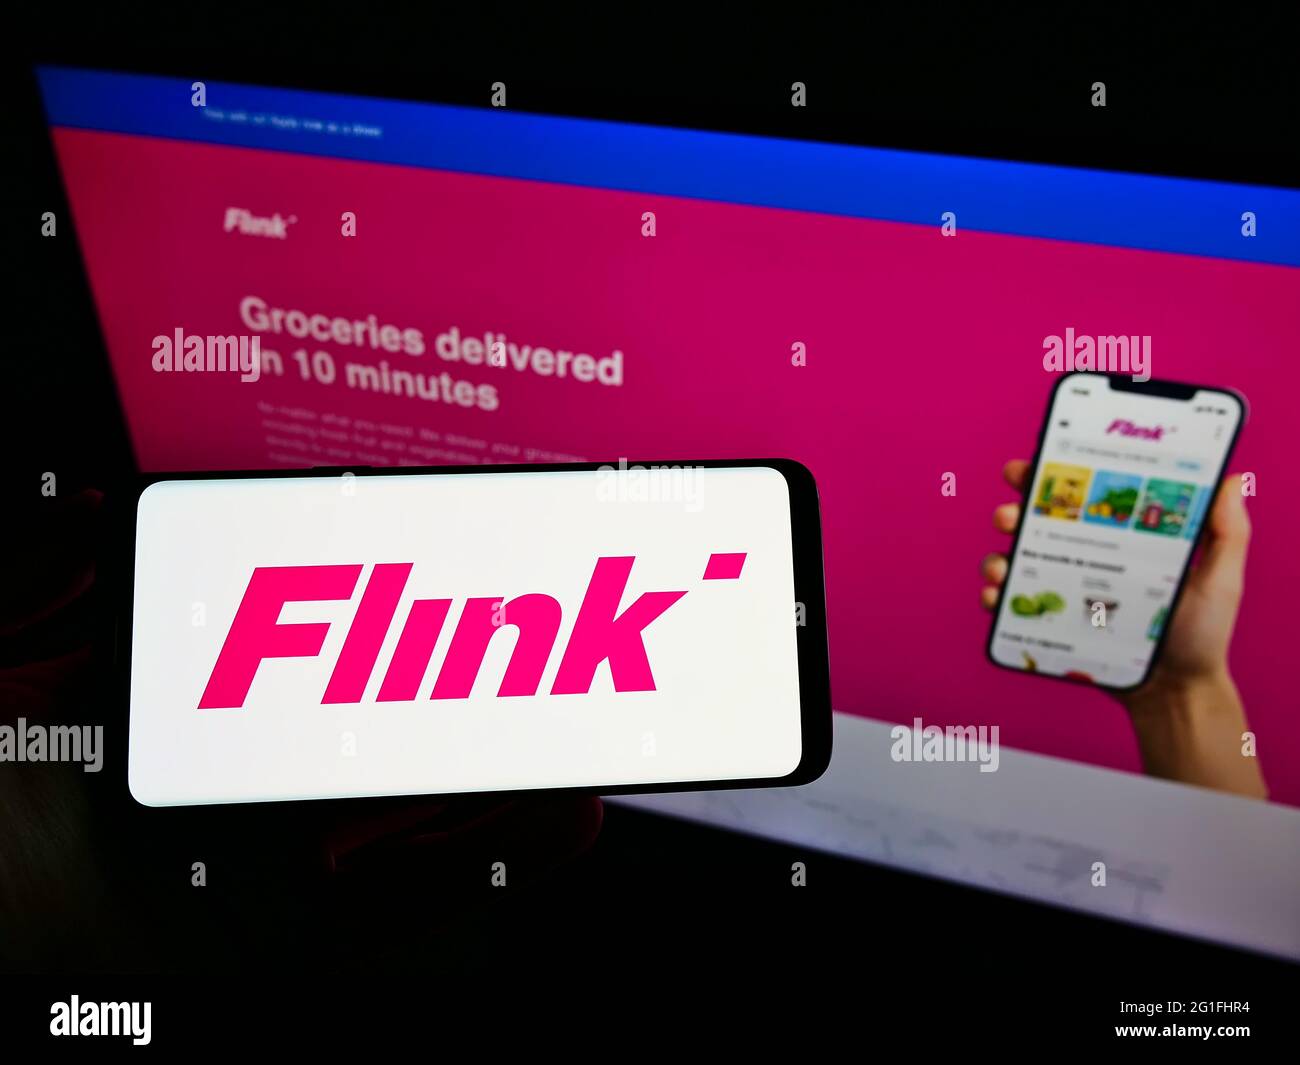 Flink delivery - Food delivery apps in Germany